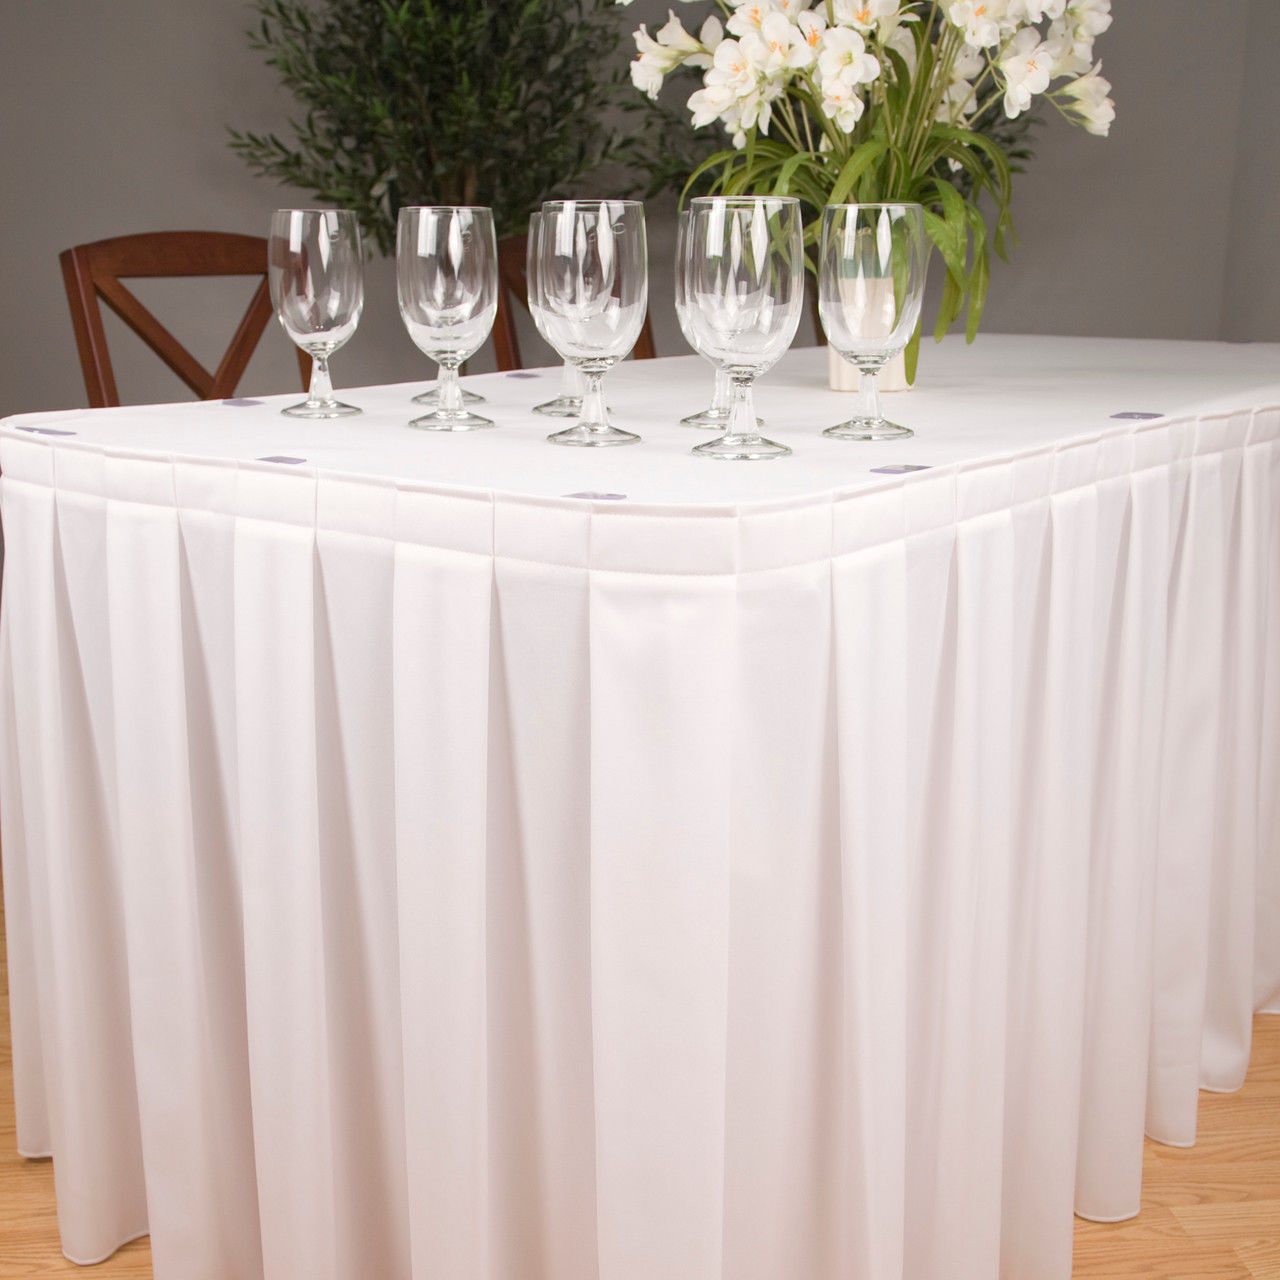 What is the length of these round table skirts?